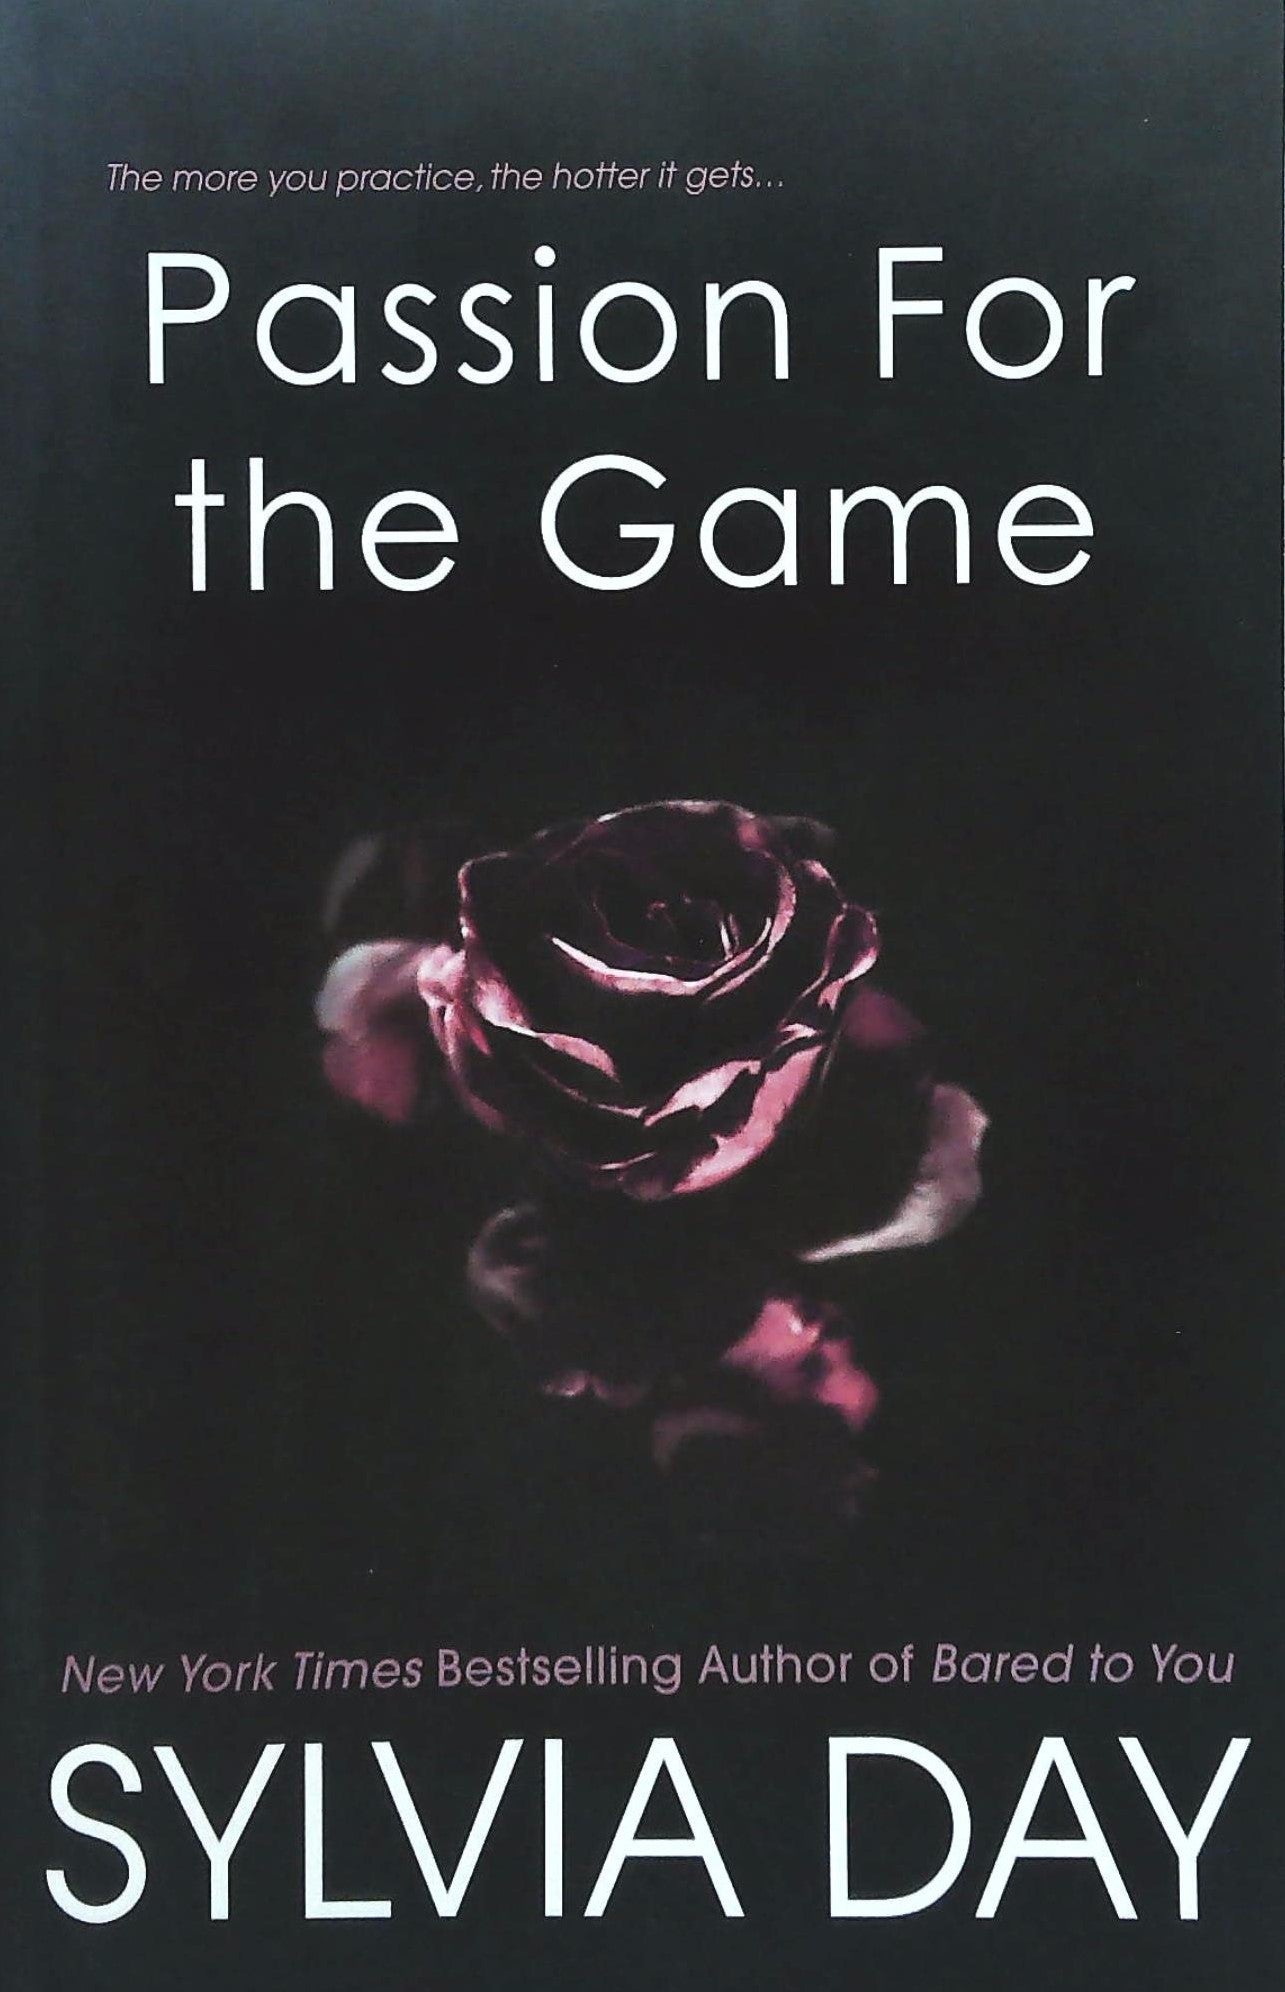 Livre ISBN 0758290438 Passions For the Game (Sylvia Day)